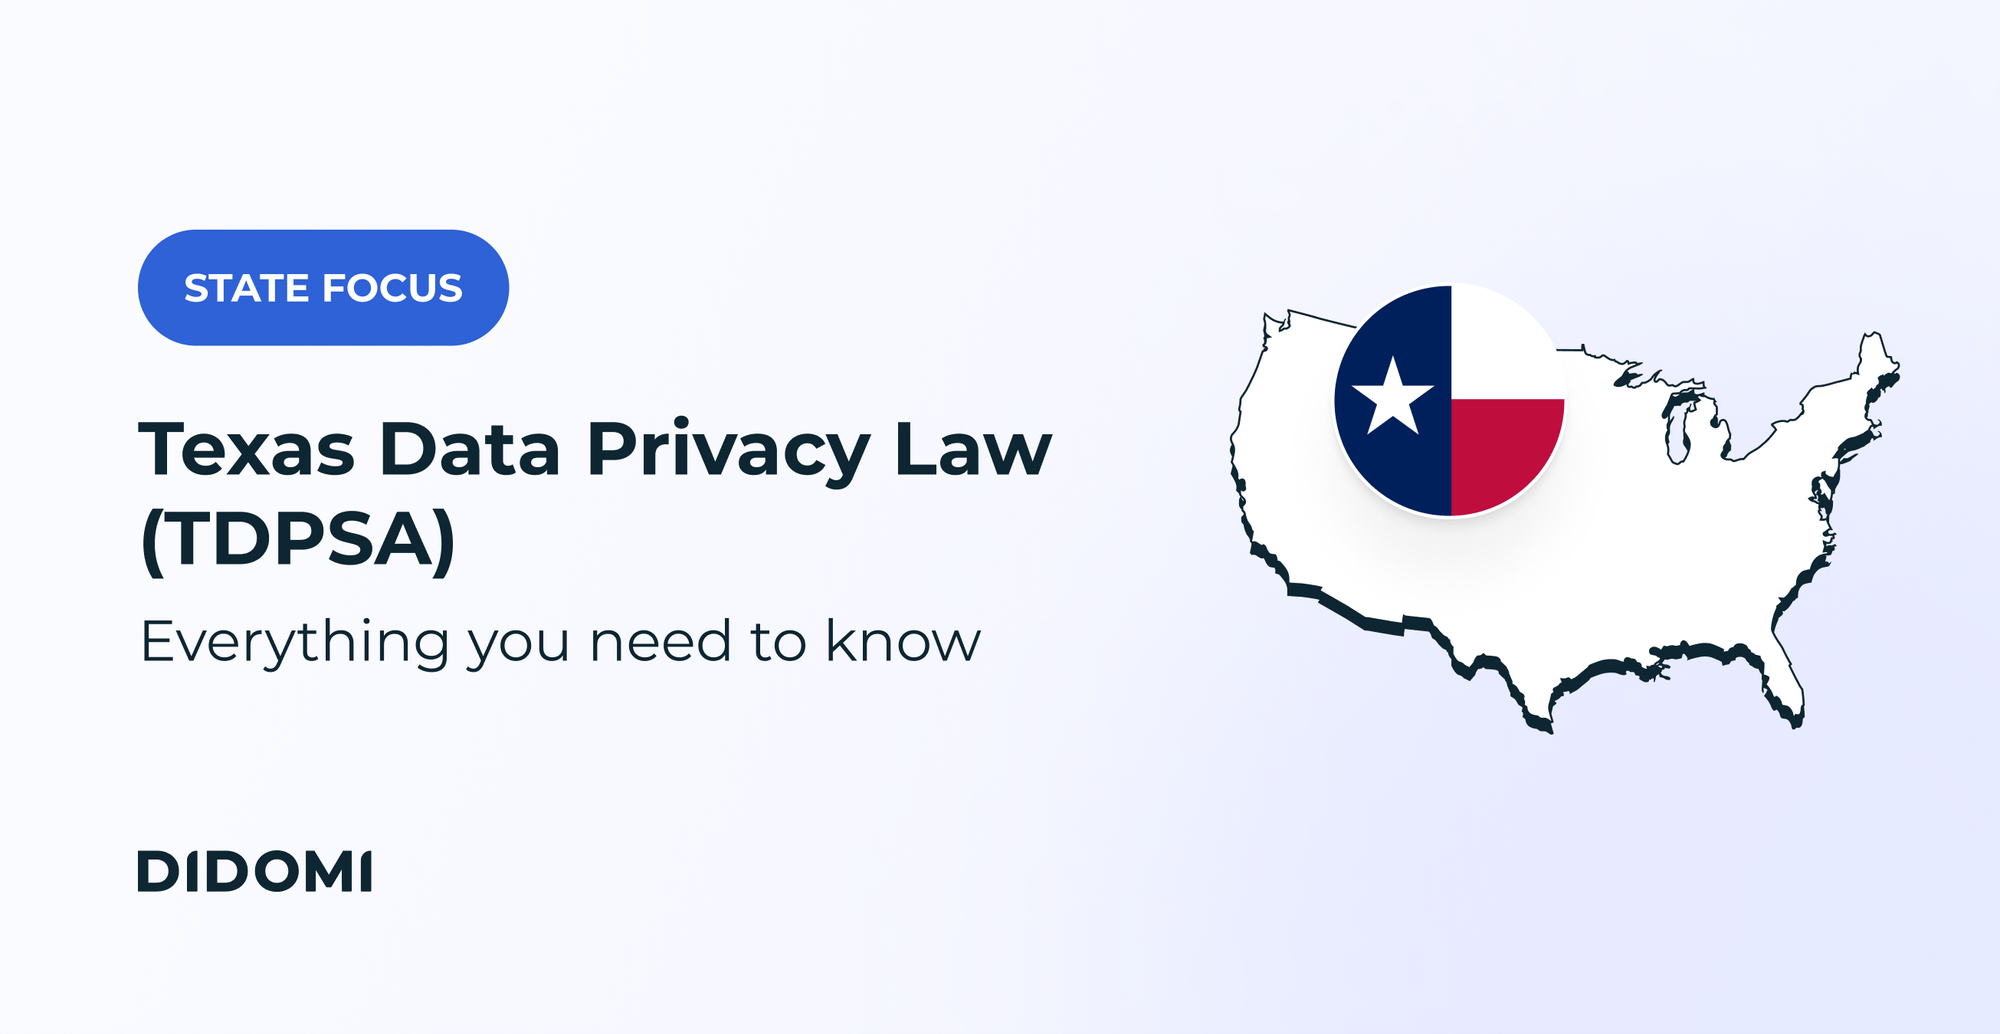 Texas Data Privacy Law (TDPSA): Everything you need to know